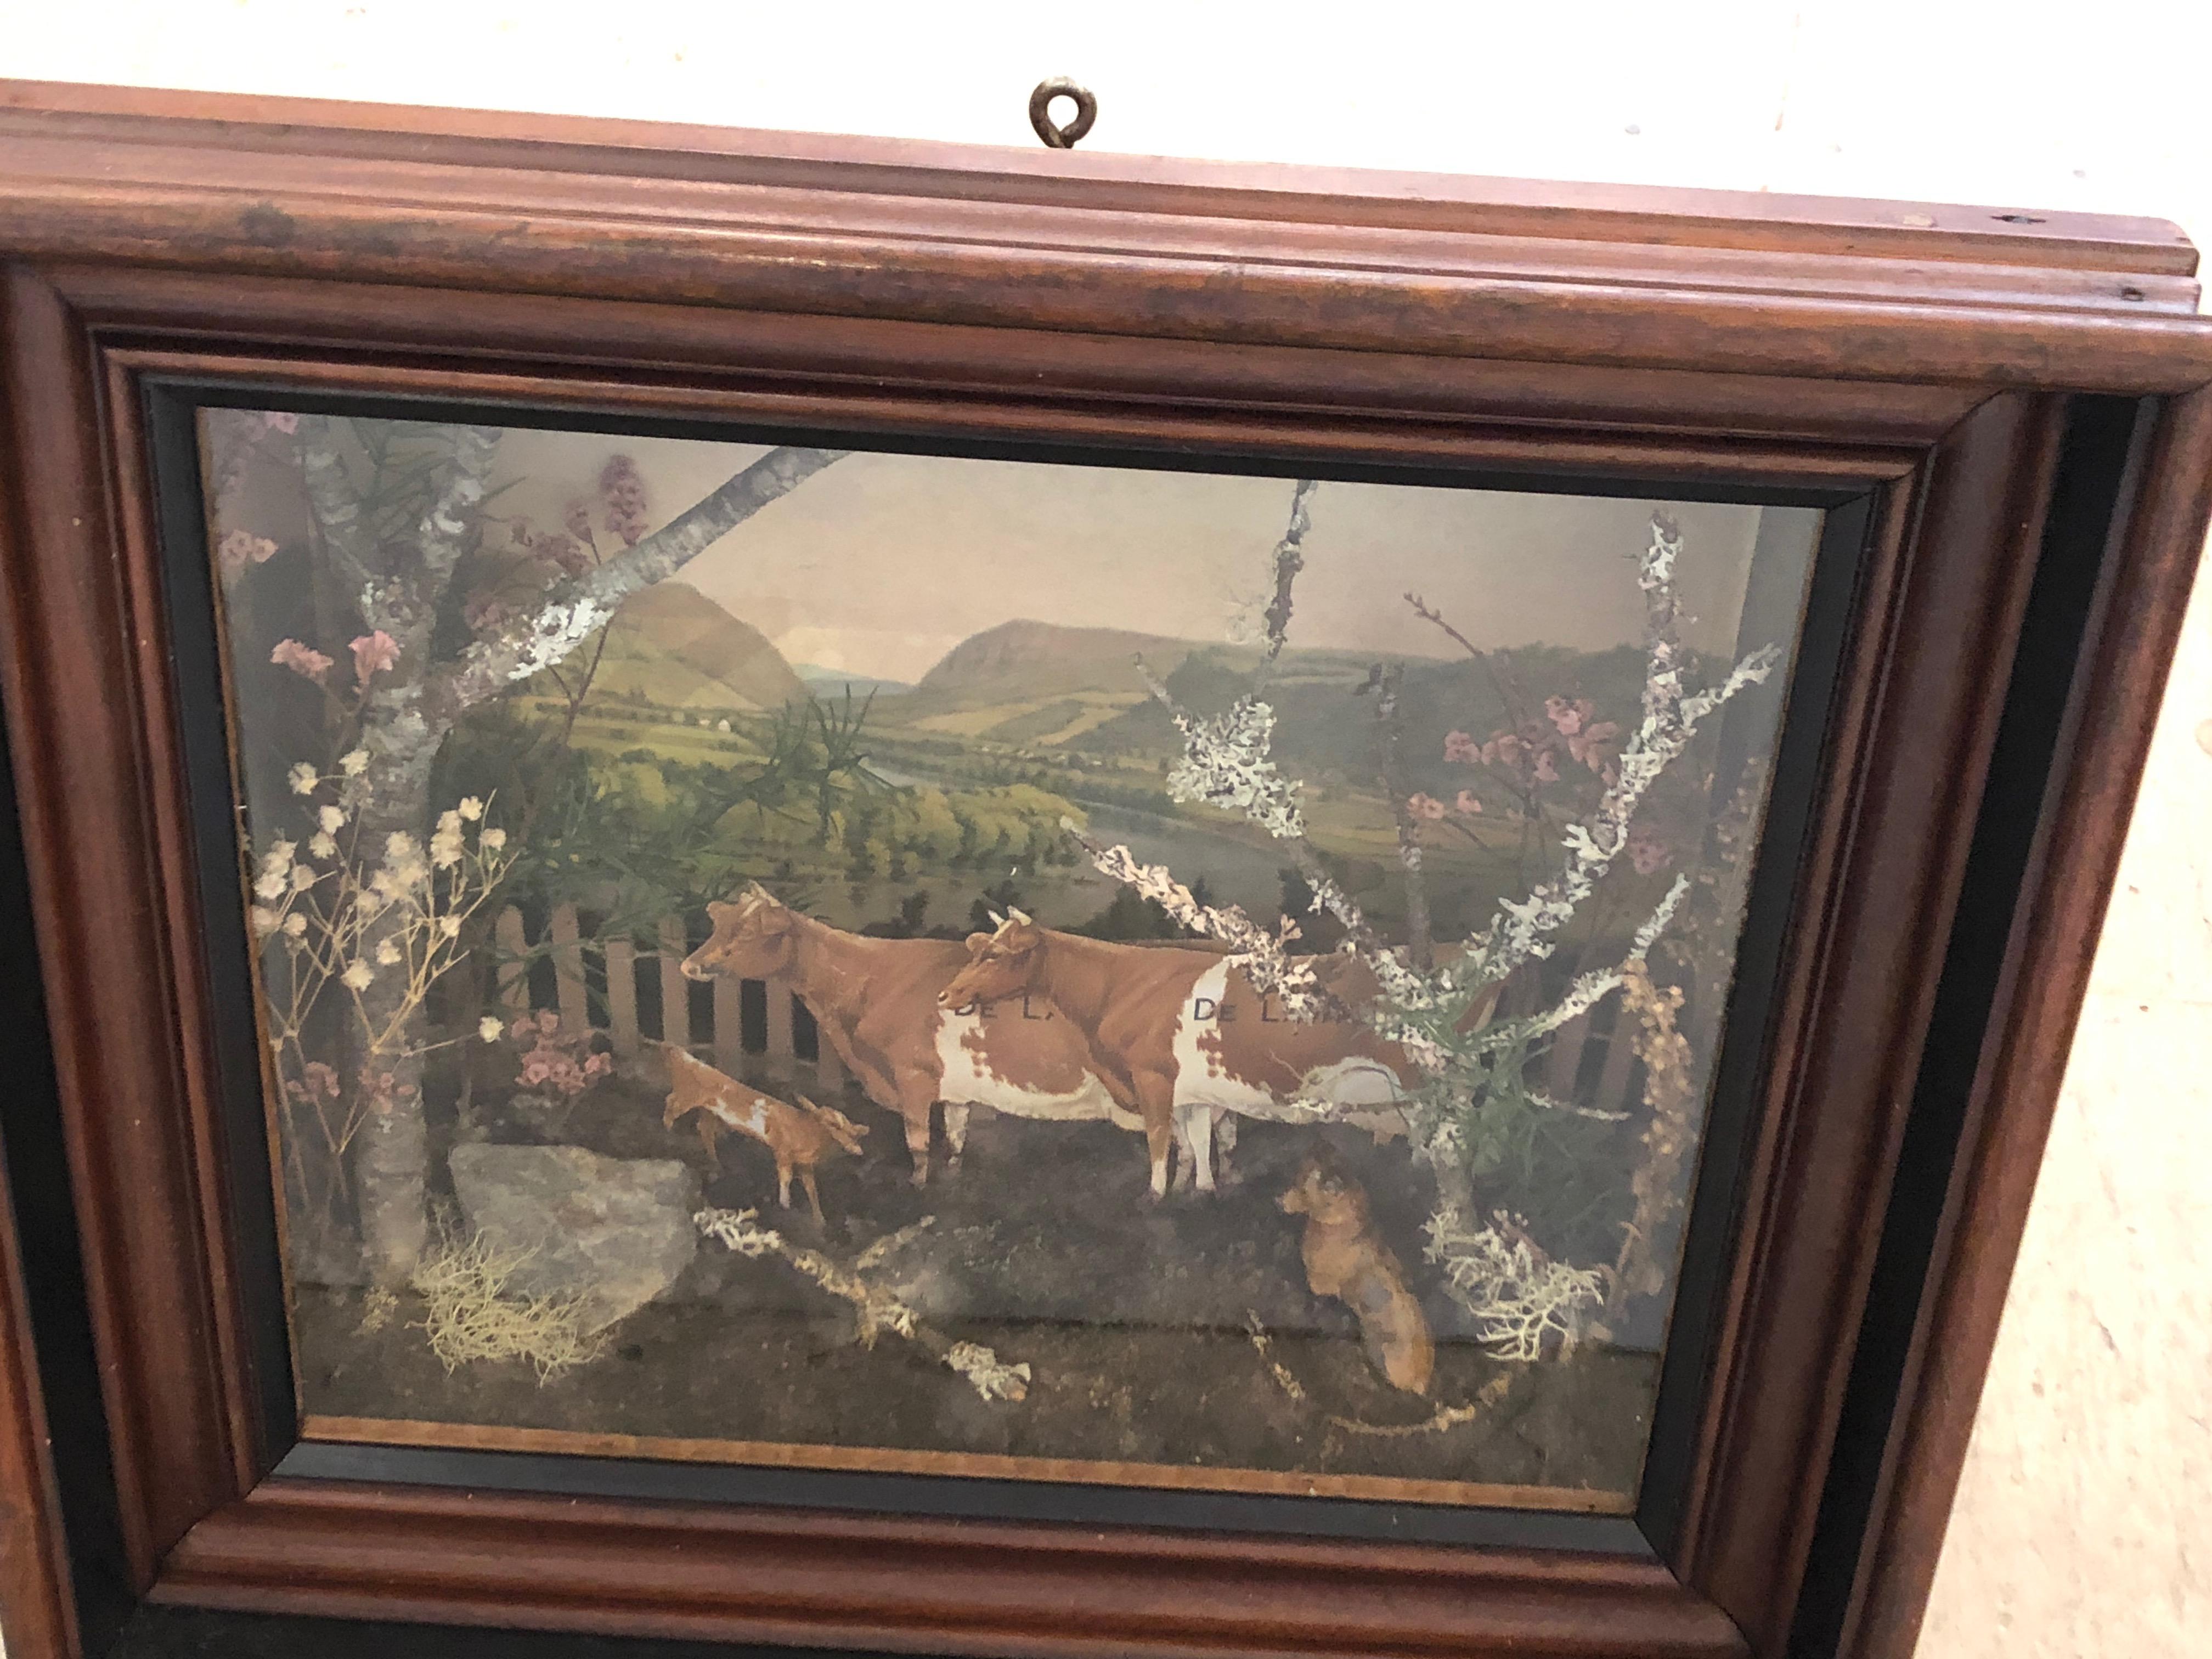 A charming Folk Art shadow box diorama having a bucolic pastural scene inside including cows and the French countryside.